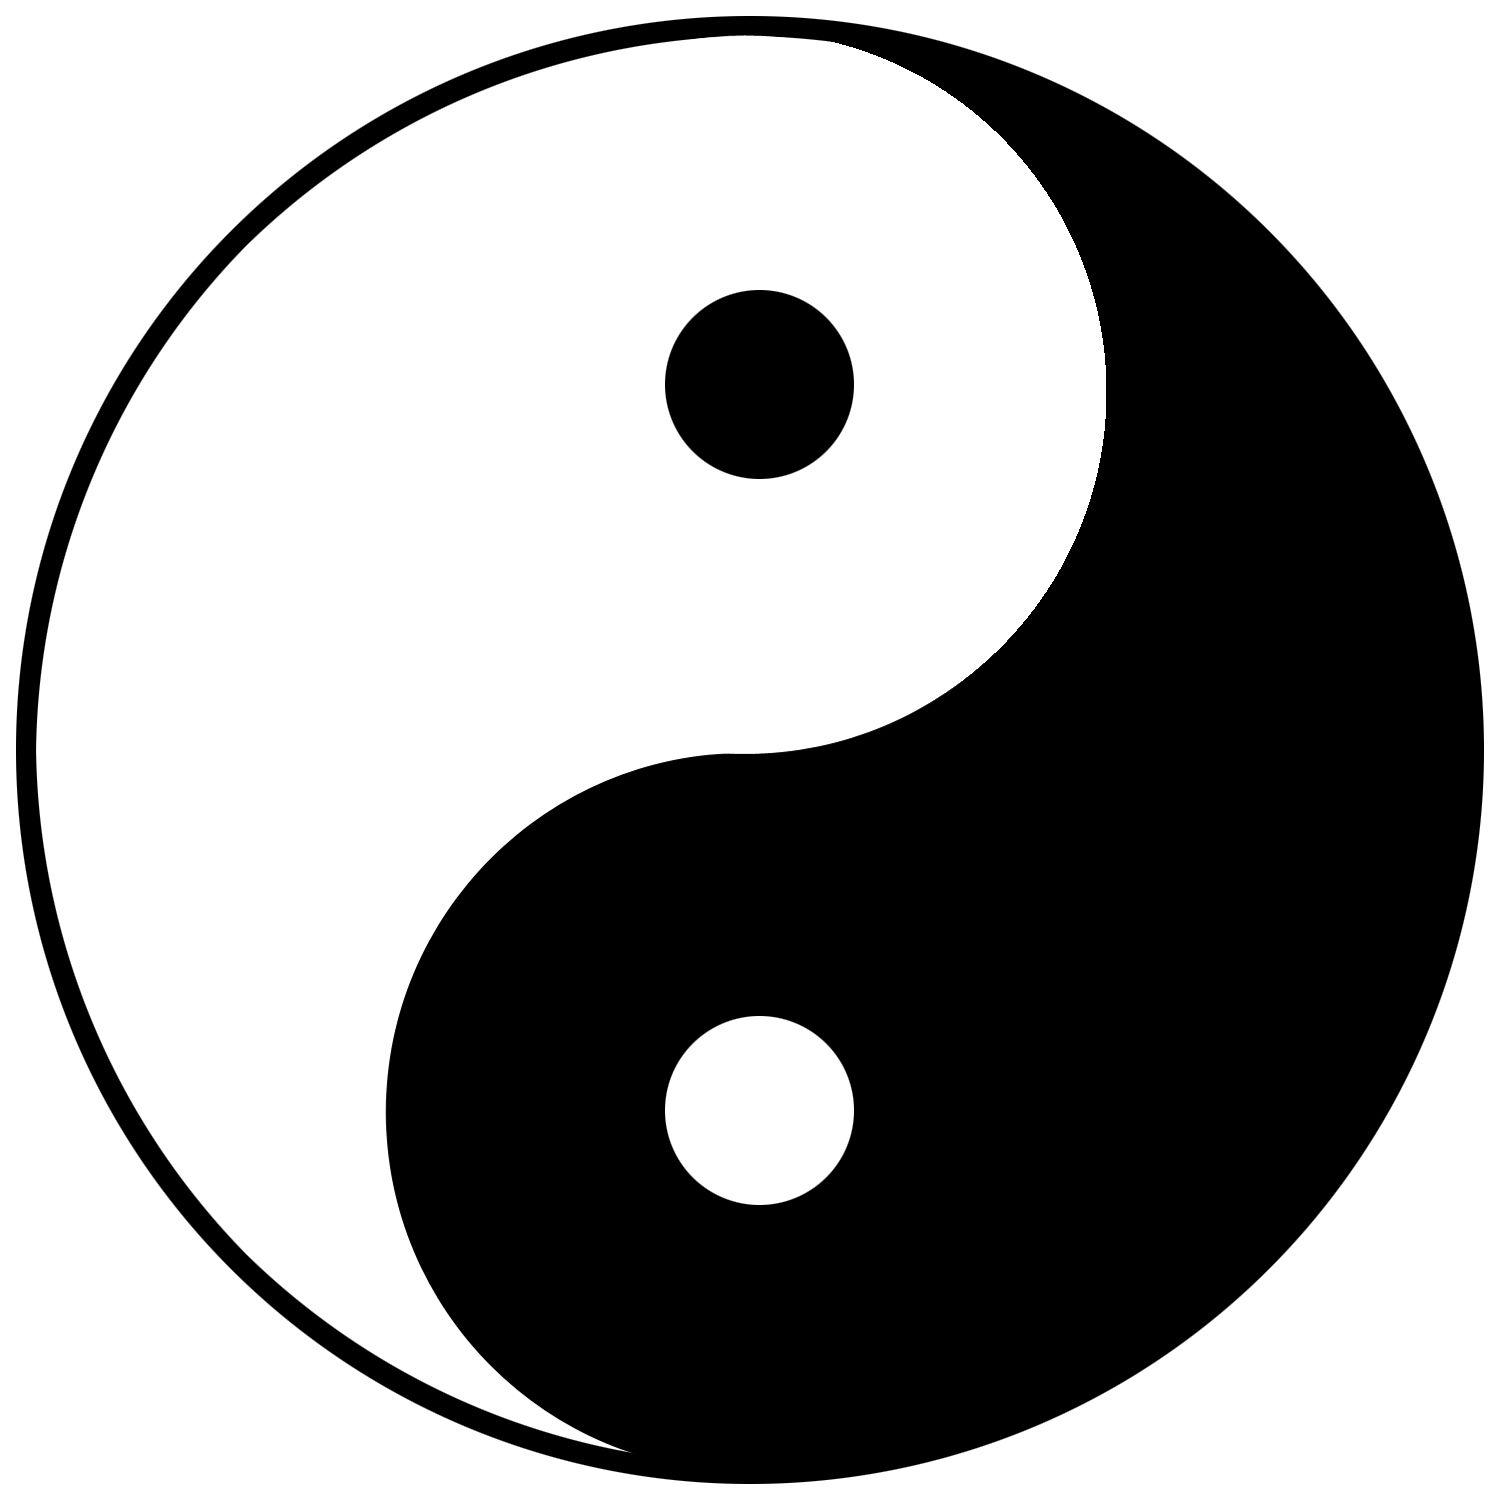 Japanese Black and White Logo - Do You Know What The Yin Yang Symbol Really Means?